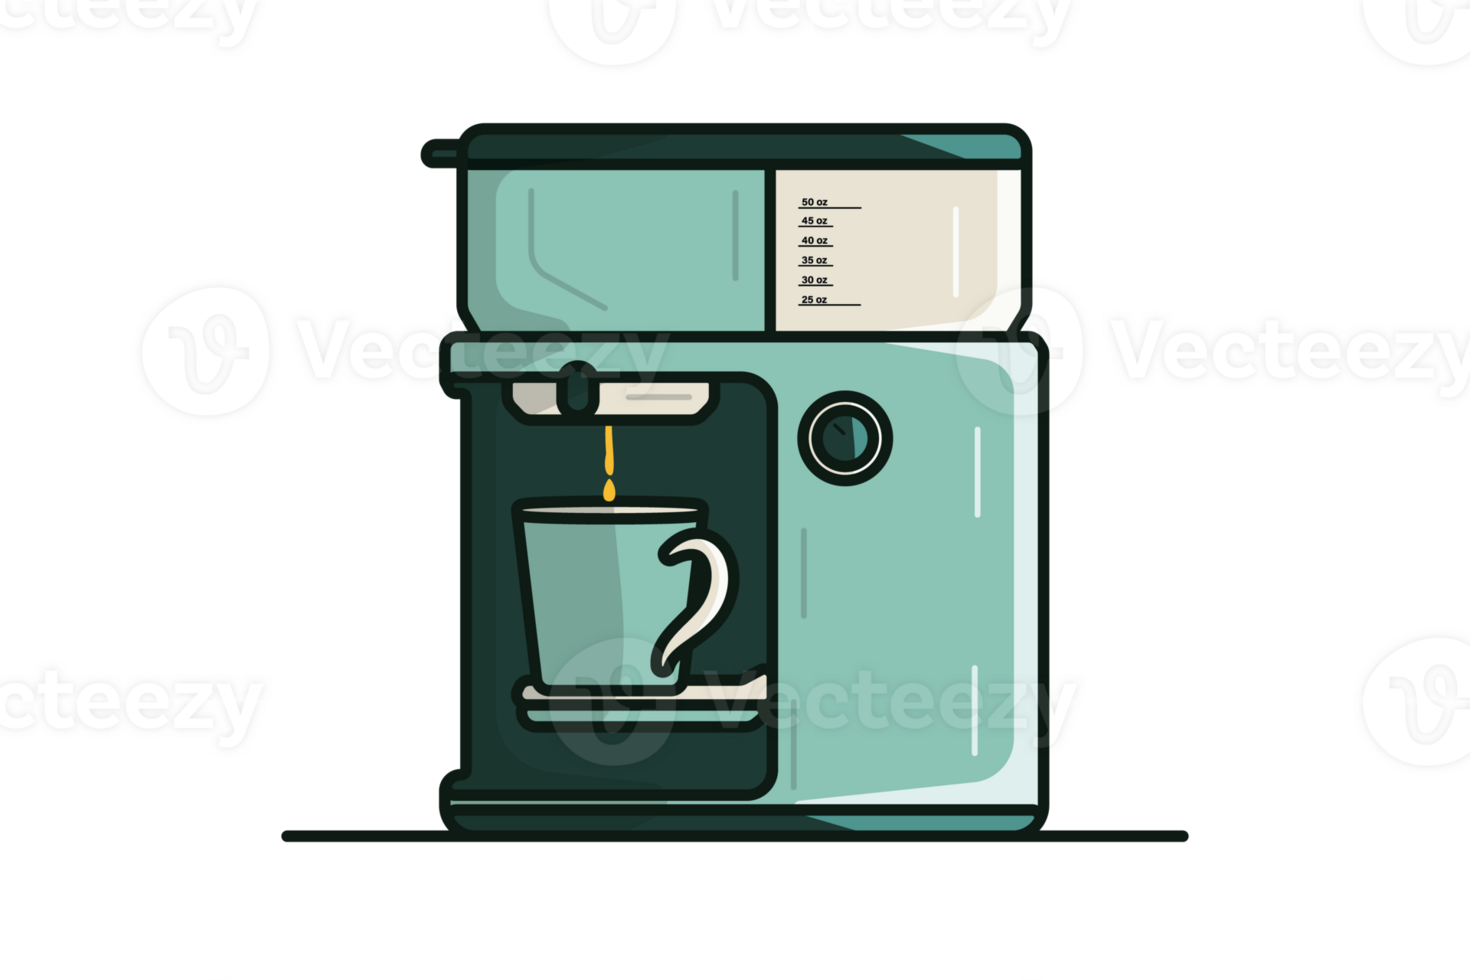 Electric Coffee Maker or Machine illustration. Home and Restaurant interior equipment icon concept. Coffee maker with cup design. png